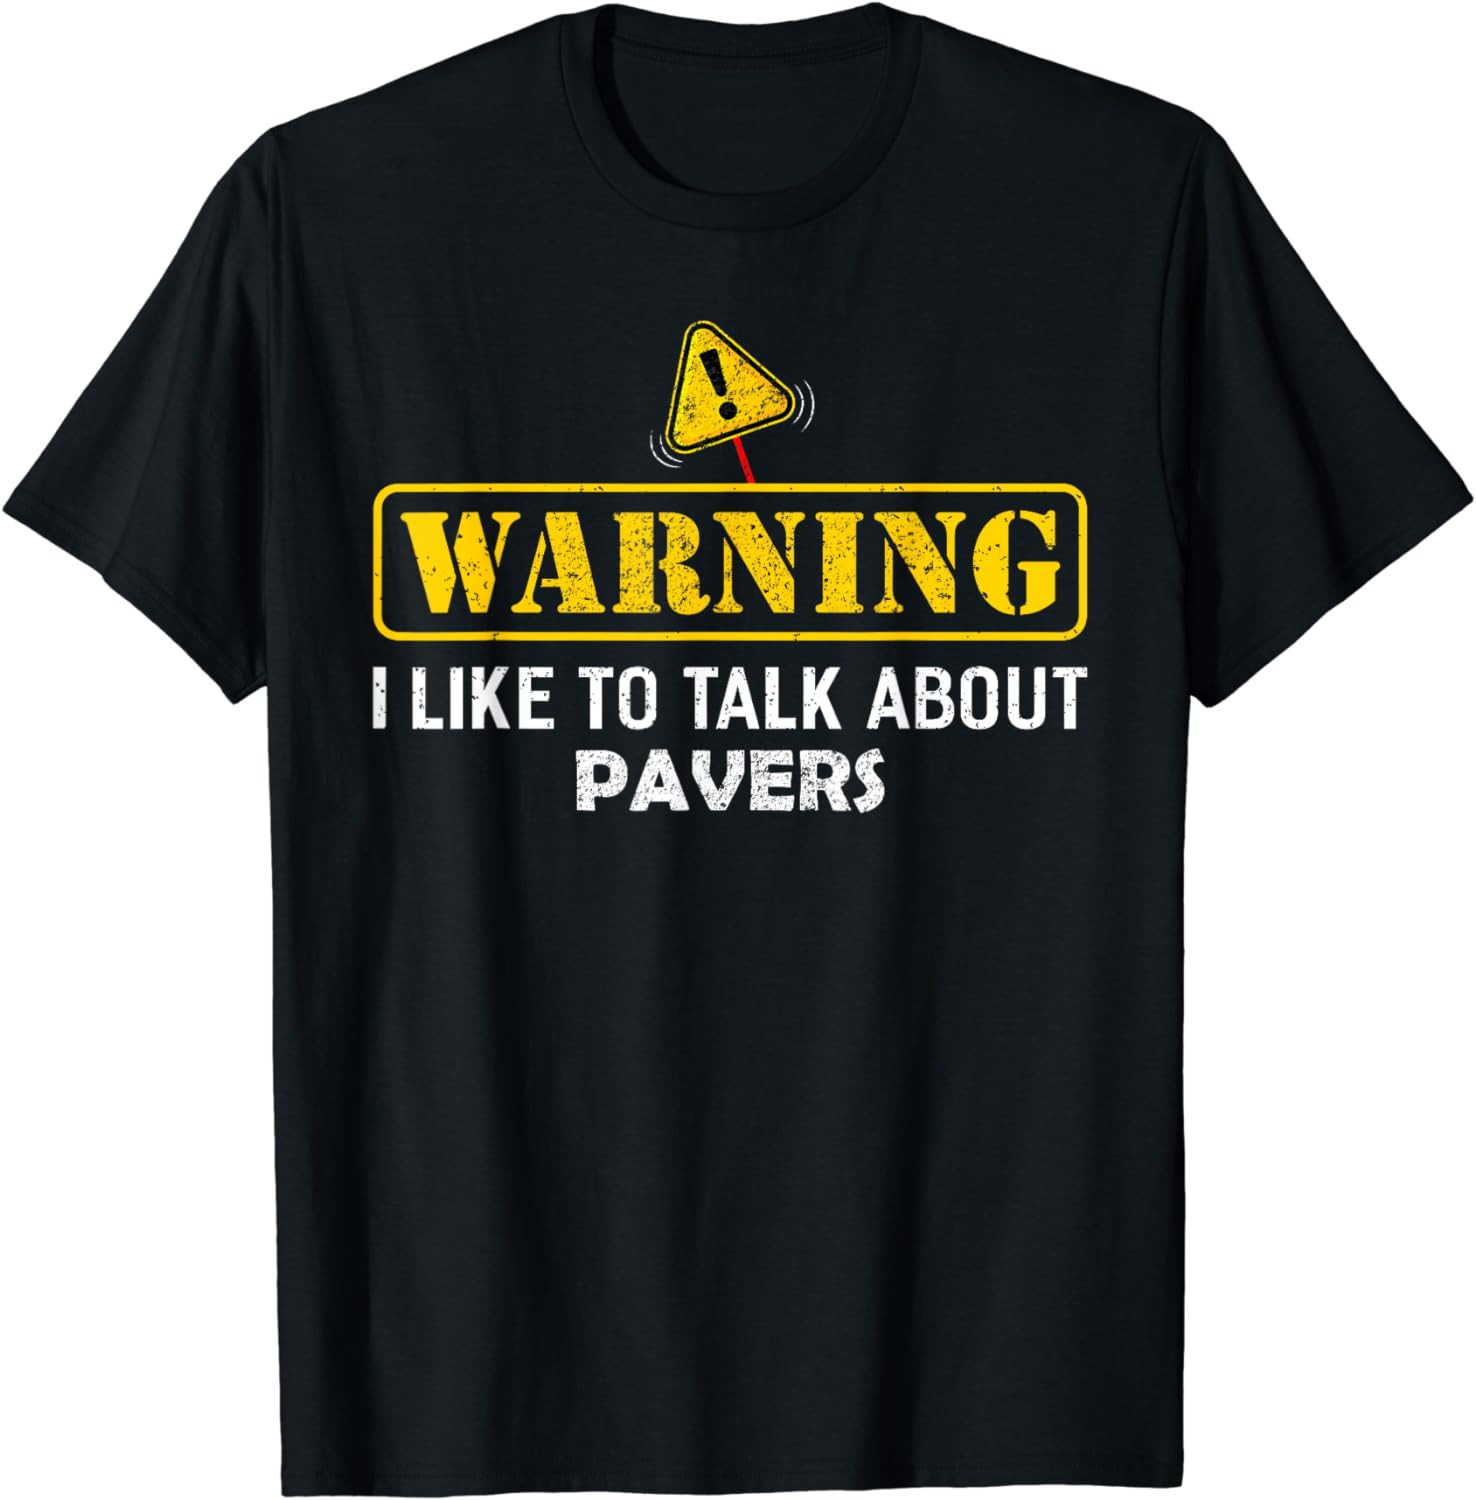 Warning! I Like To Talk About Pavers T-Shirt For Paver T-Shirt